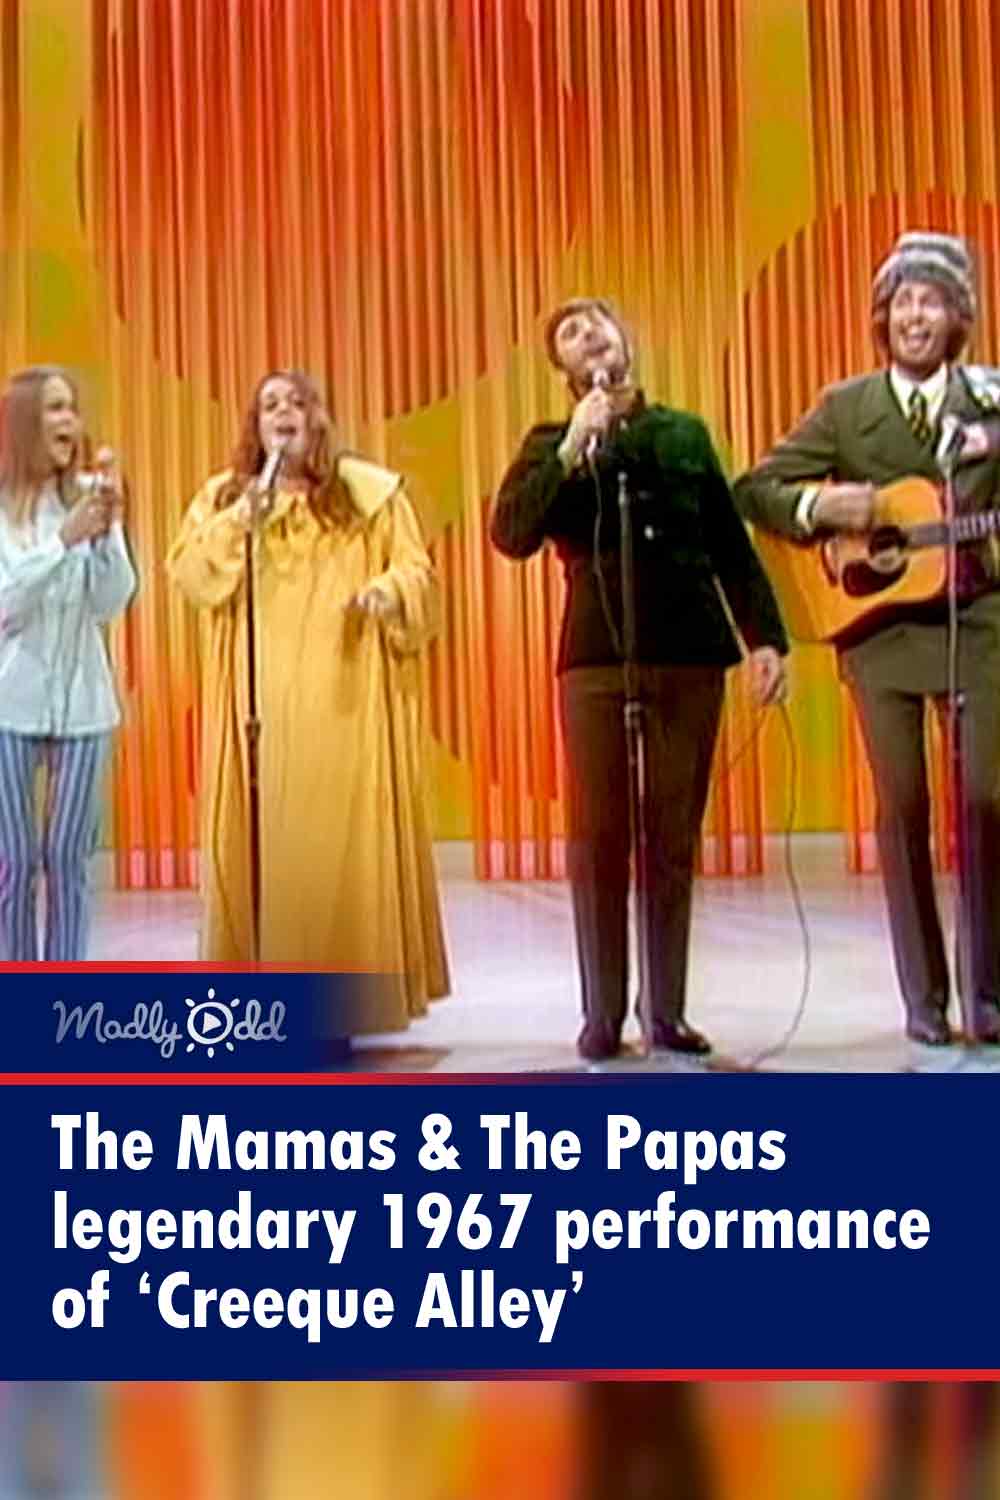 The Mamas & The Papas legendary 1967 performance of ‘Creeque Alley’